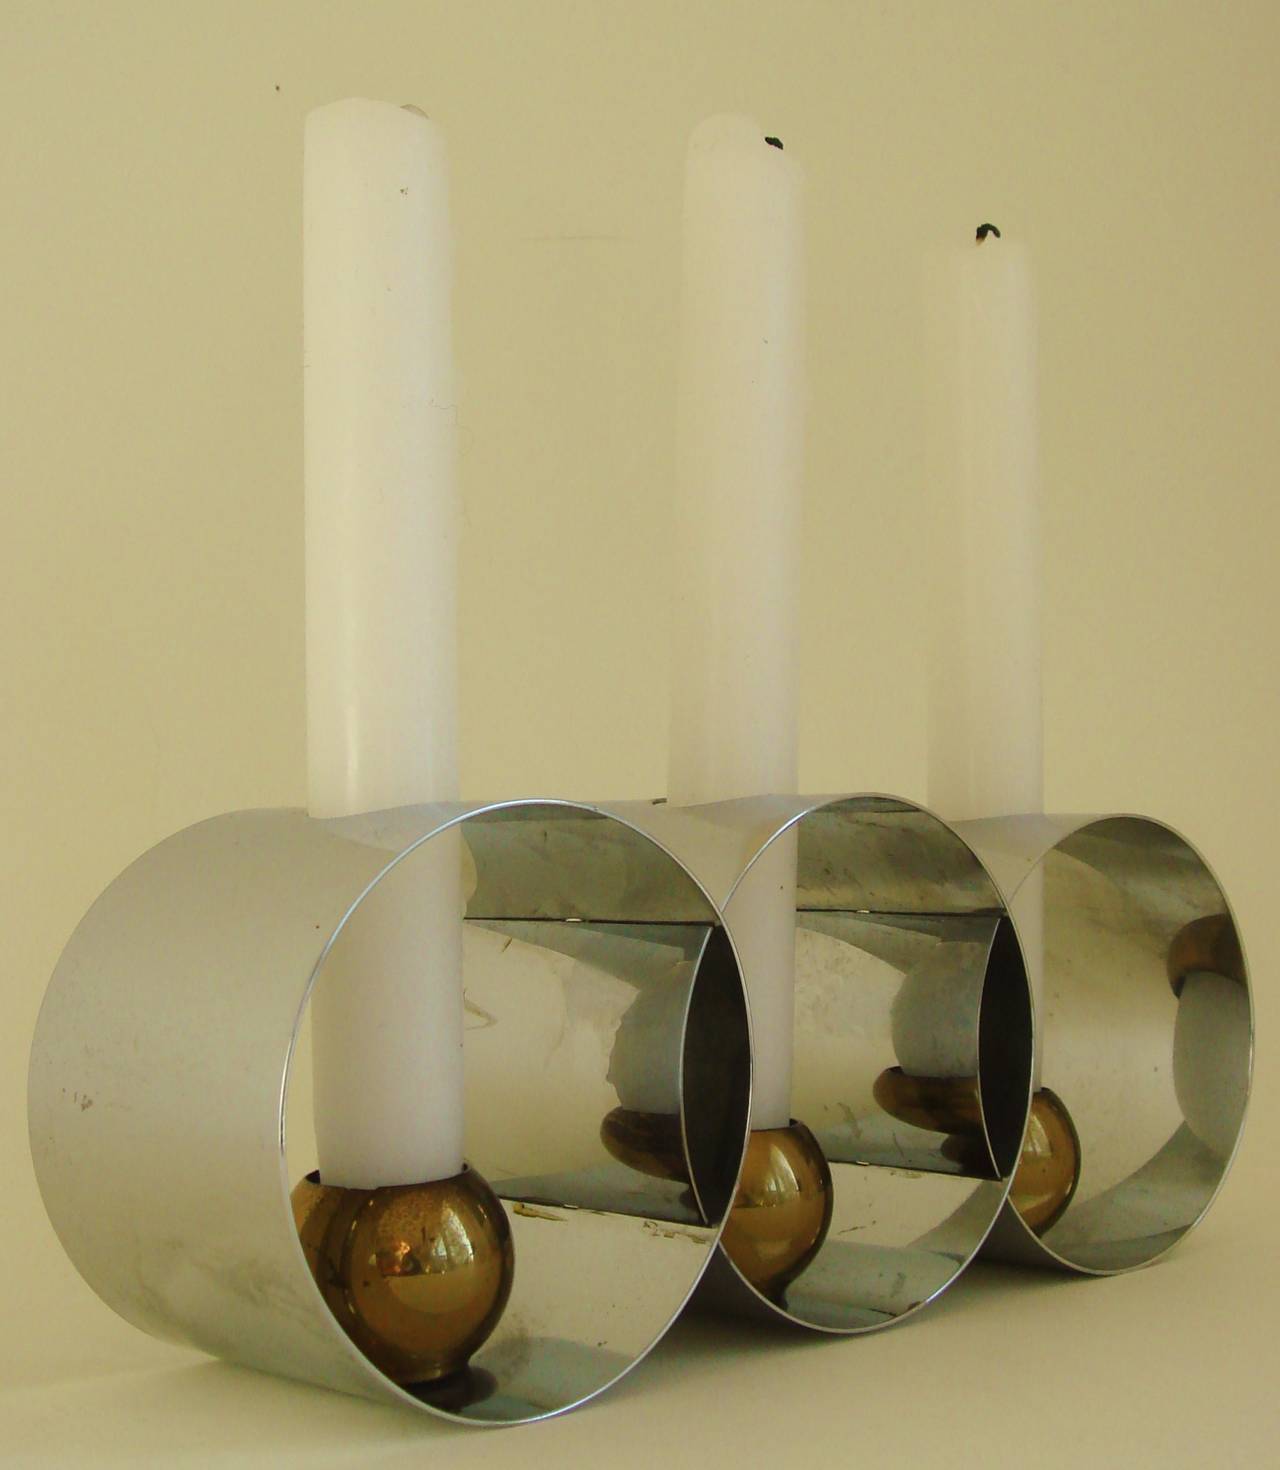 These beautifully executed American Art Deco pair of triple chrome and brass candle holders are known as 'Candlespheres'. They were one of the only two pieces created for Revere by the very accomplished and multi-disciplined designer Helen Dryden,